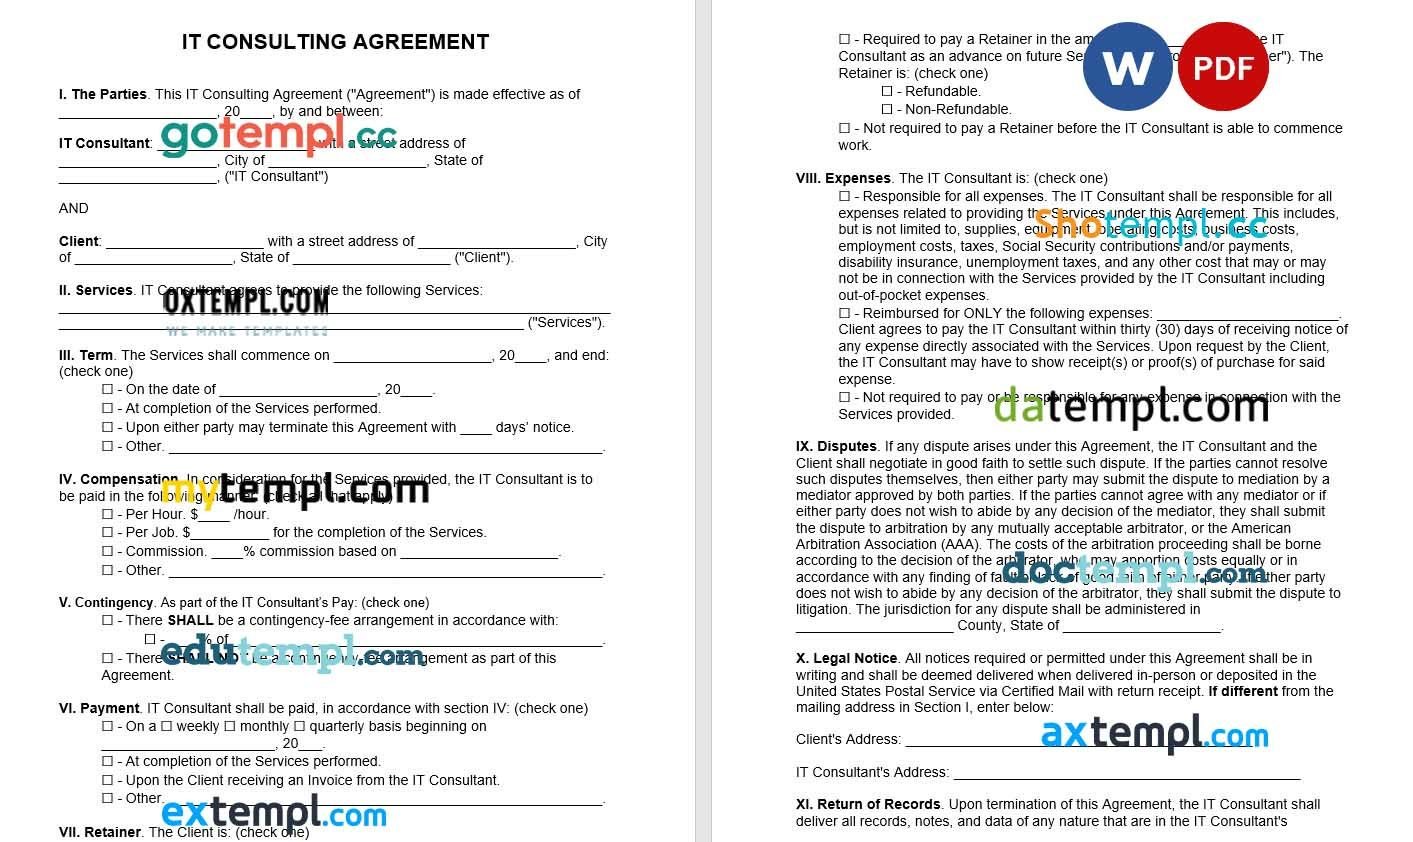 IT Consultant Agreement Word example, fully editable